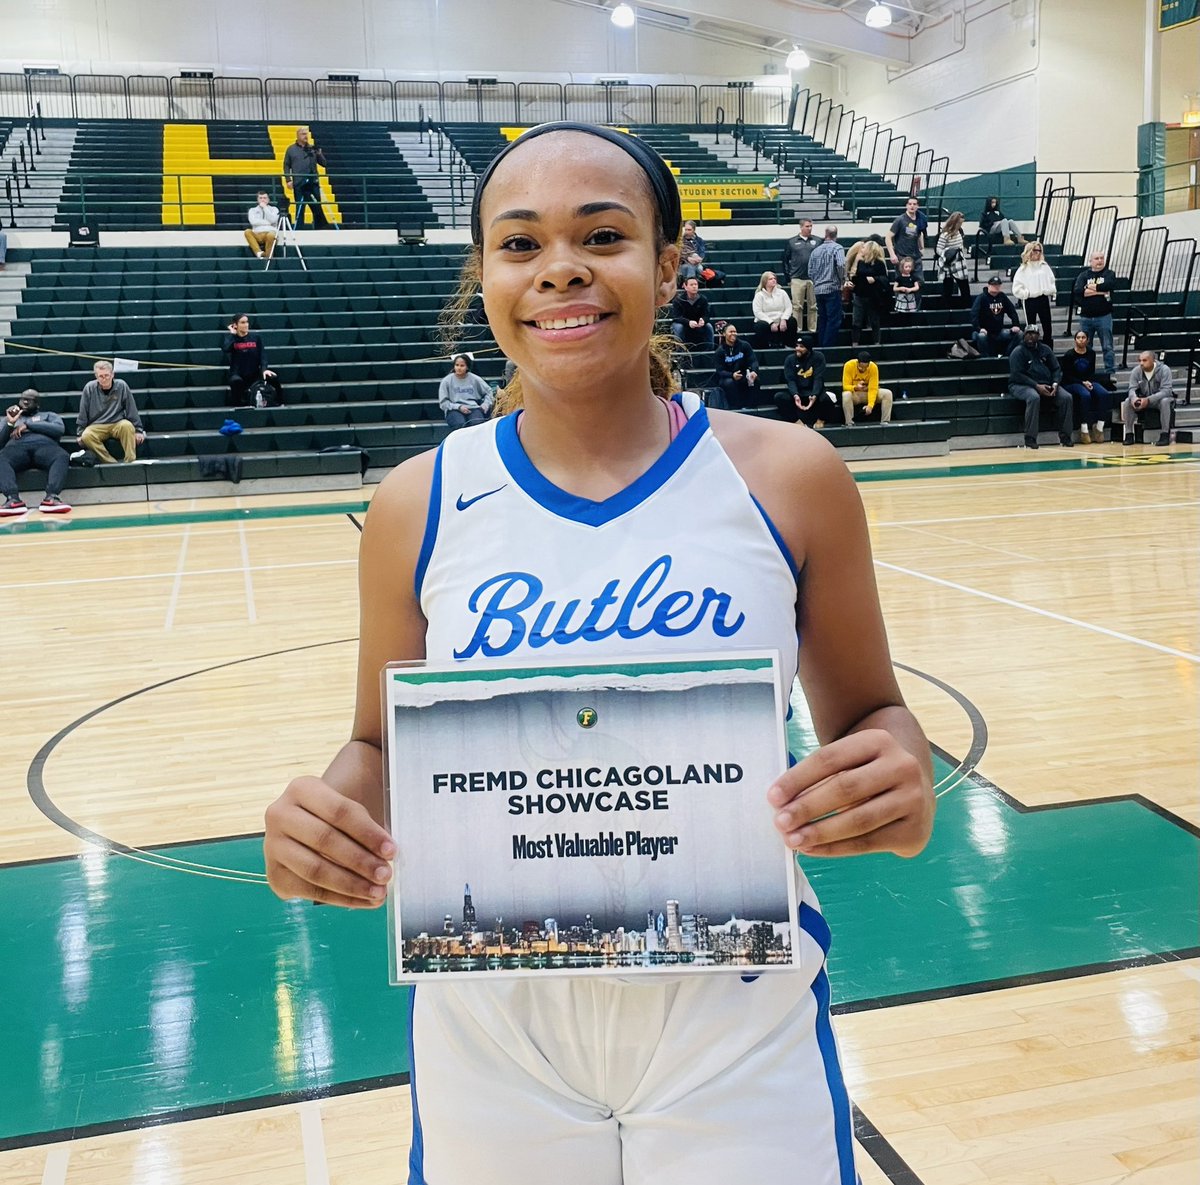 12/2/2023 - Congrats to Xamiya for being selected Player of the Game @wfhoops1 Chicago Invitational Showcase @MyMyBuckets 

#ButlerCollegePrepGBBALL 
#LadyLynxBCP 
#LynxEatemUp🐯 
#GoLynx🏀🧡💙 
#FeartheLynxBCP
#LadyLynxwantitall 
#LadyLynxRedemptionTour
#MoreHeat @jumpman23